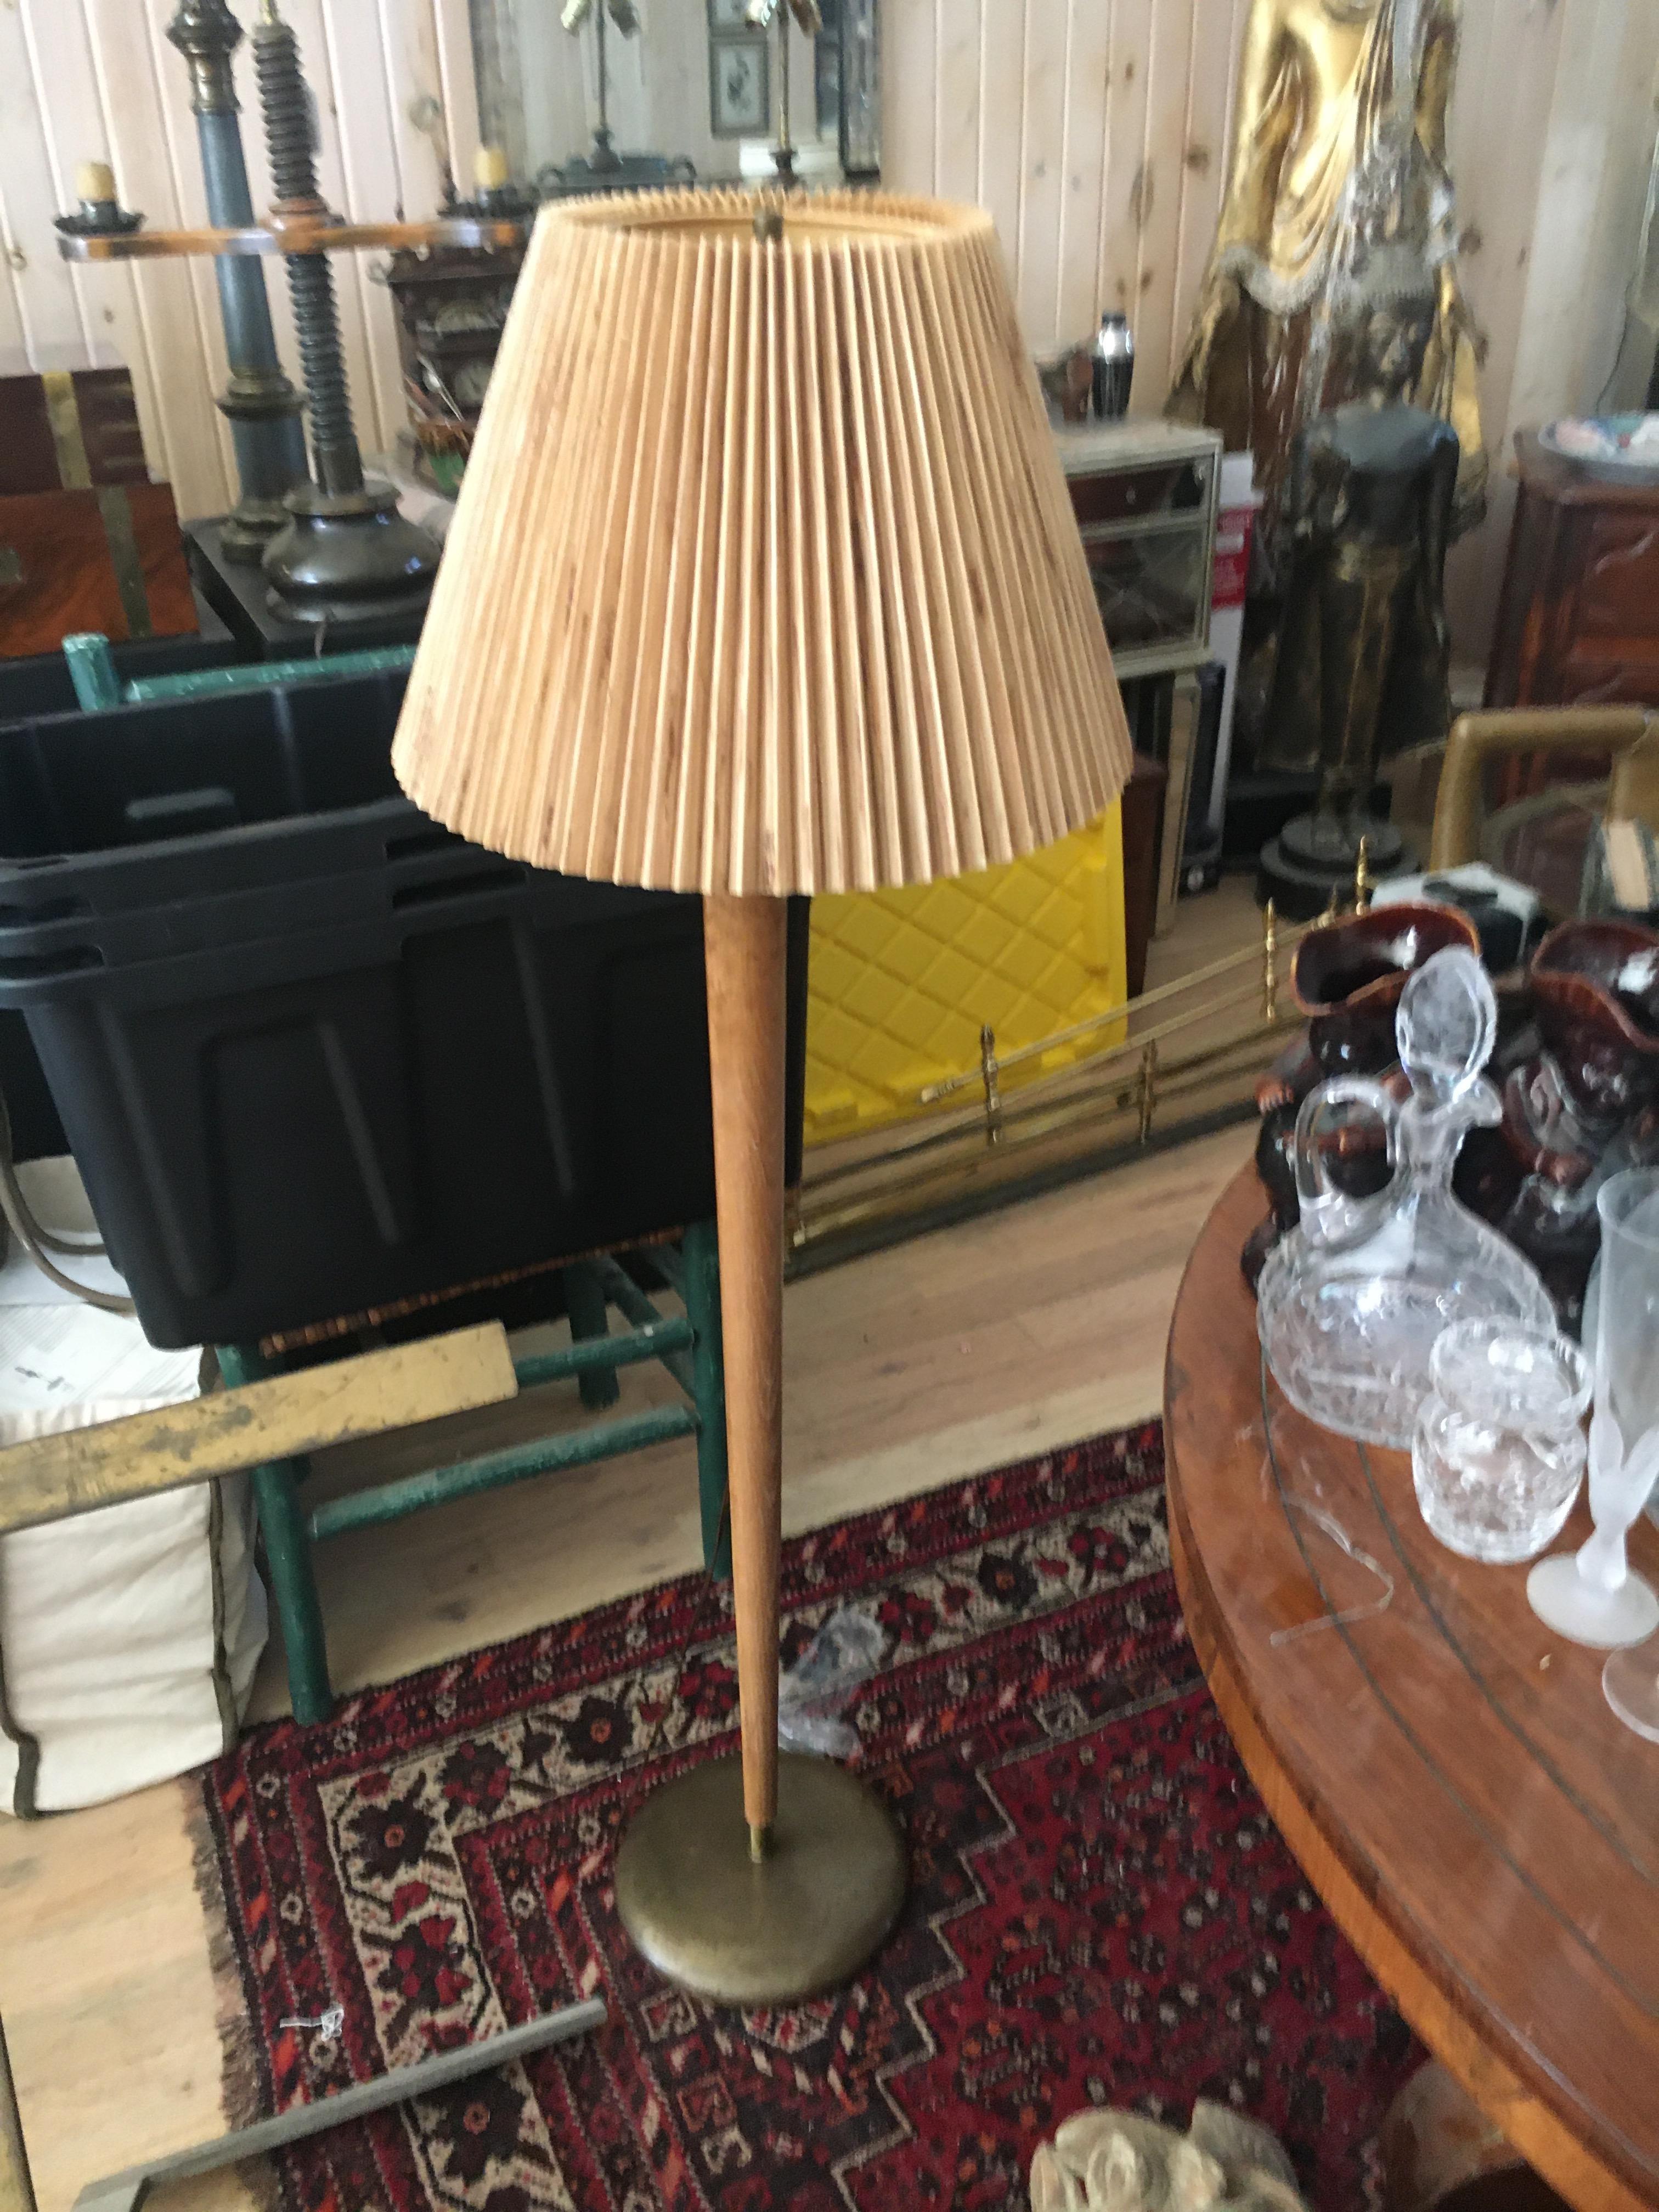 Spectacular midcentury teak and brass floor lamp, nice clean lines and patina. Needs to be rewired, have a shade but probably needs to be replaced. 54